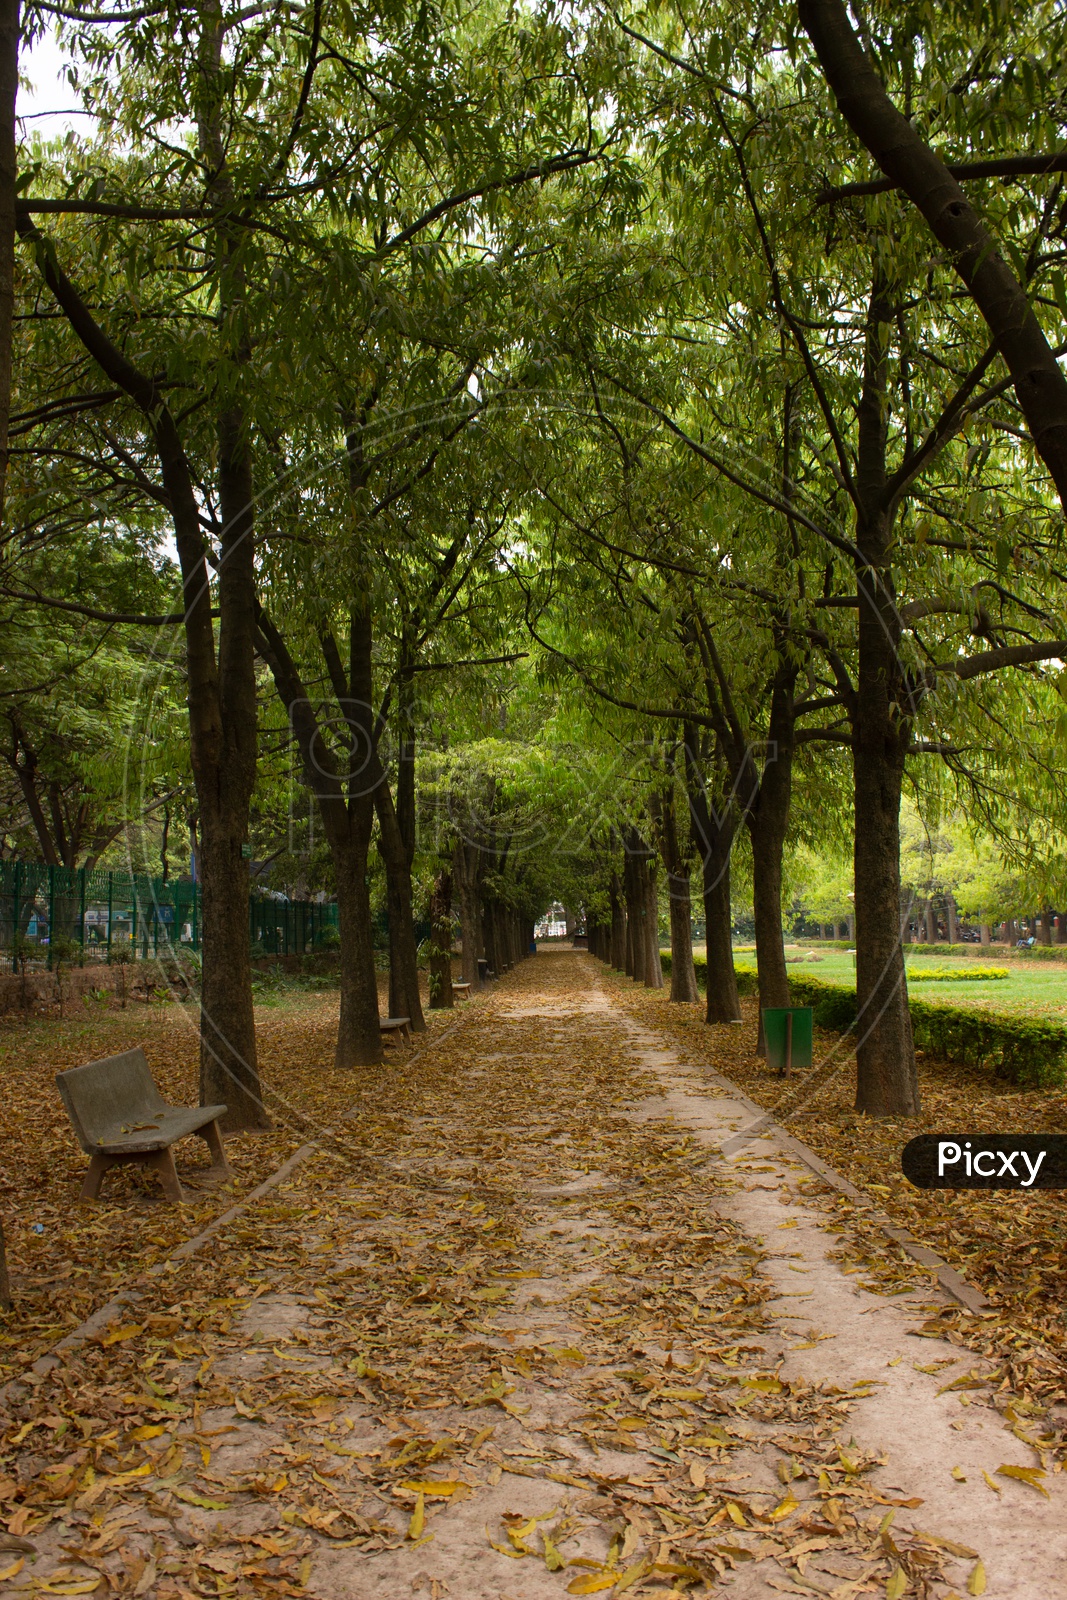 Pathways in park with Benches Along both sides and Trees along Both Sides